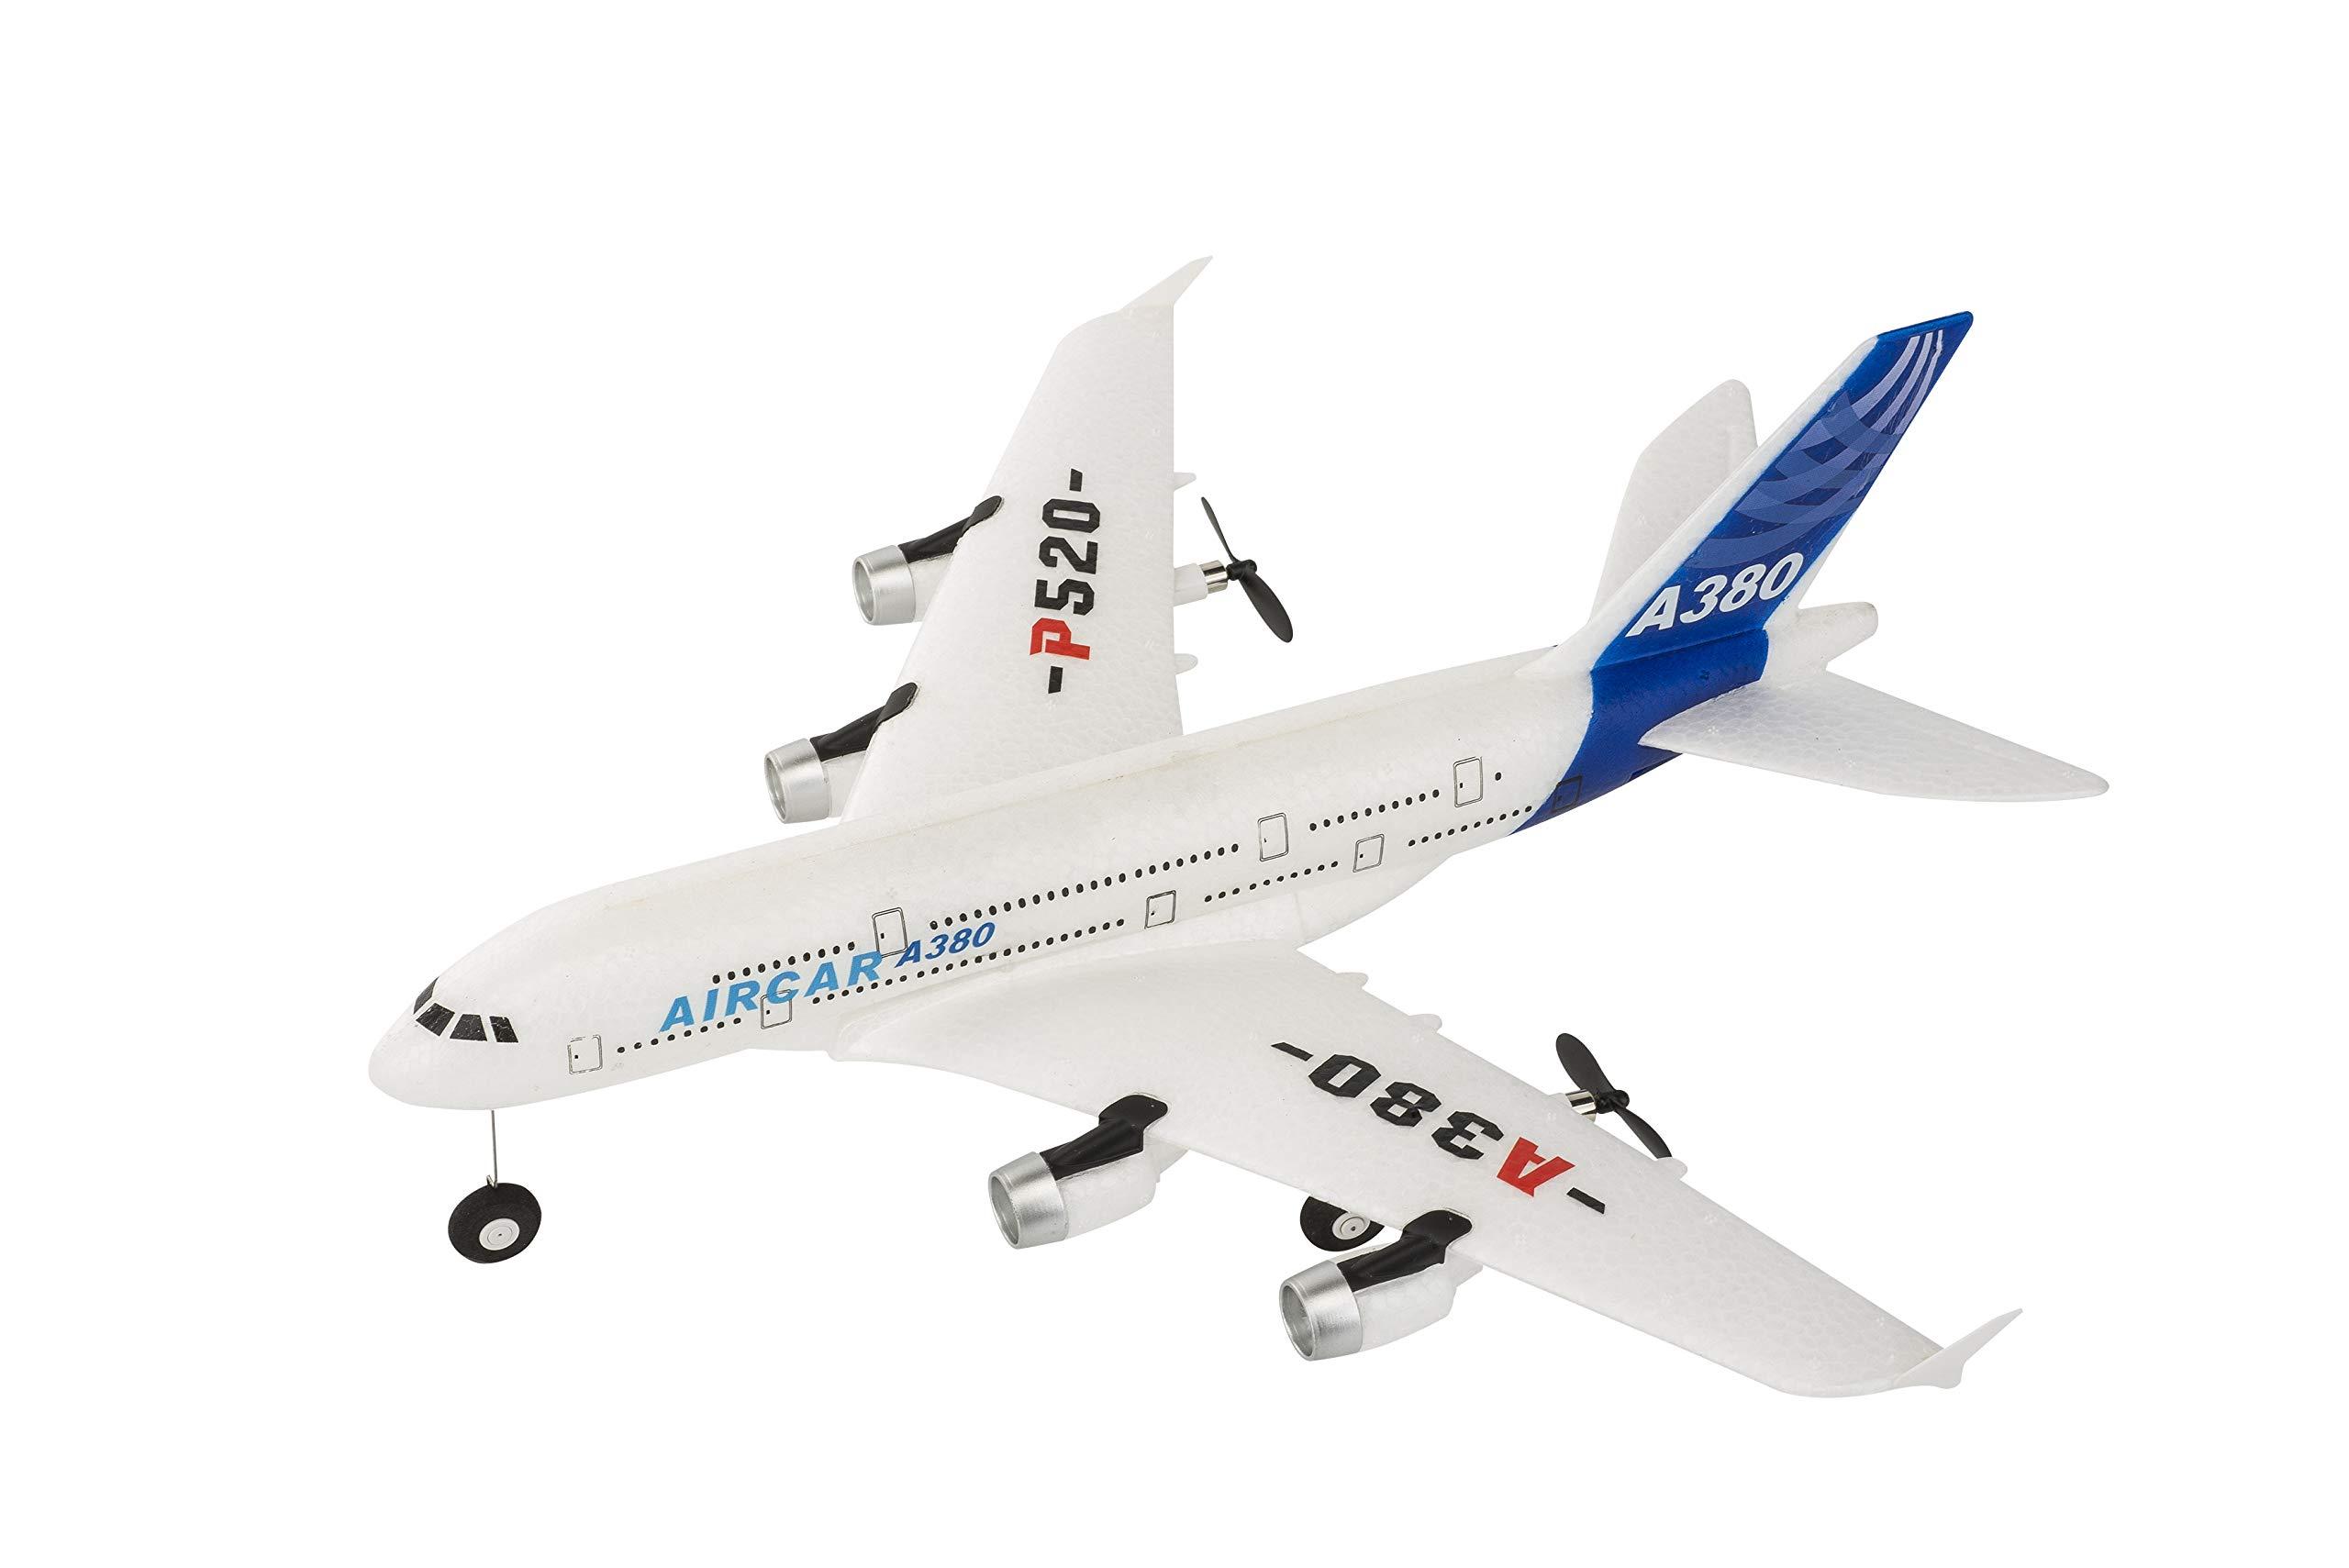 Airbus A380 Rc Plane: Purchasing an A380 RC Plane: Options and Accessories